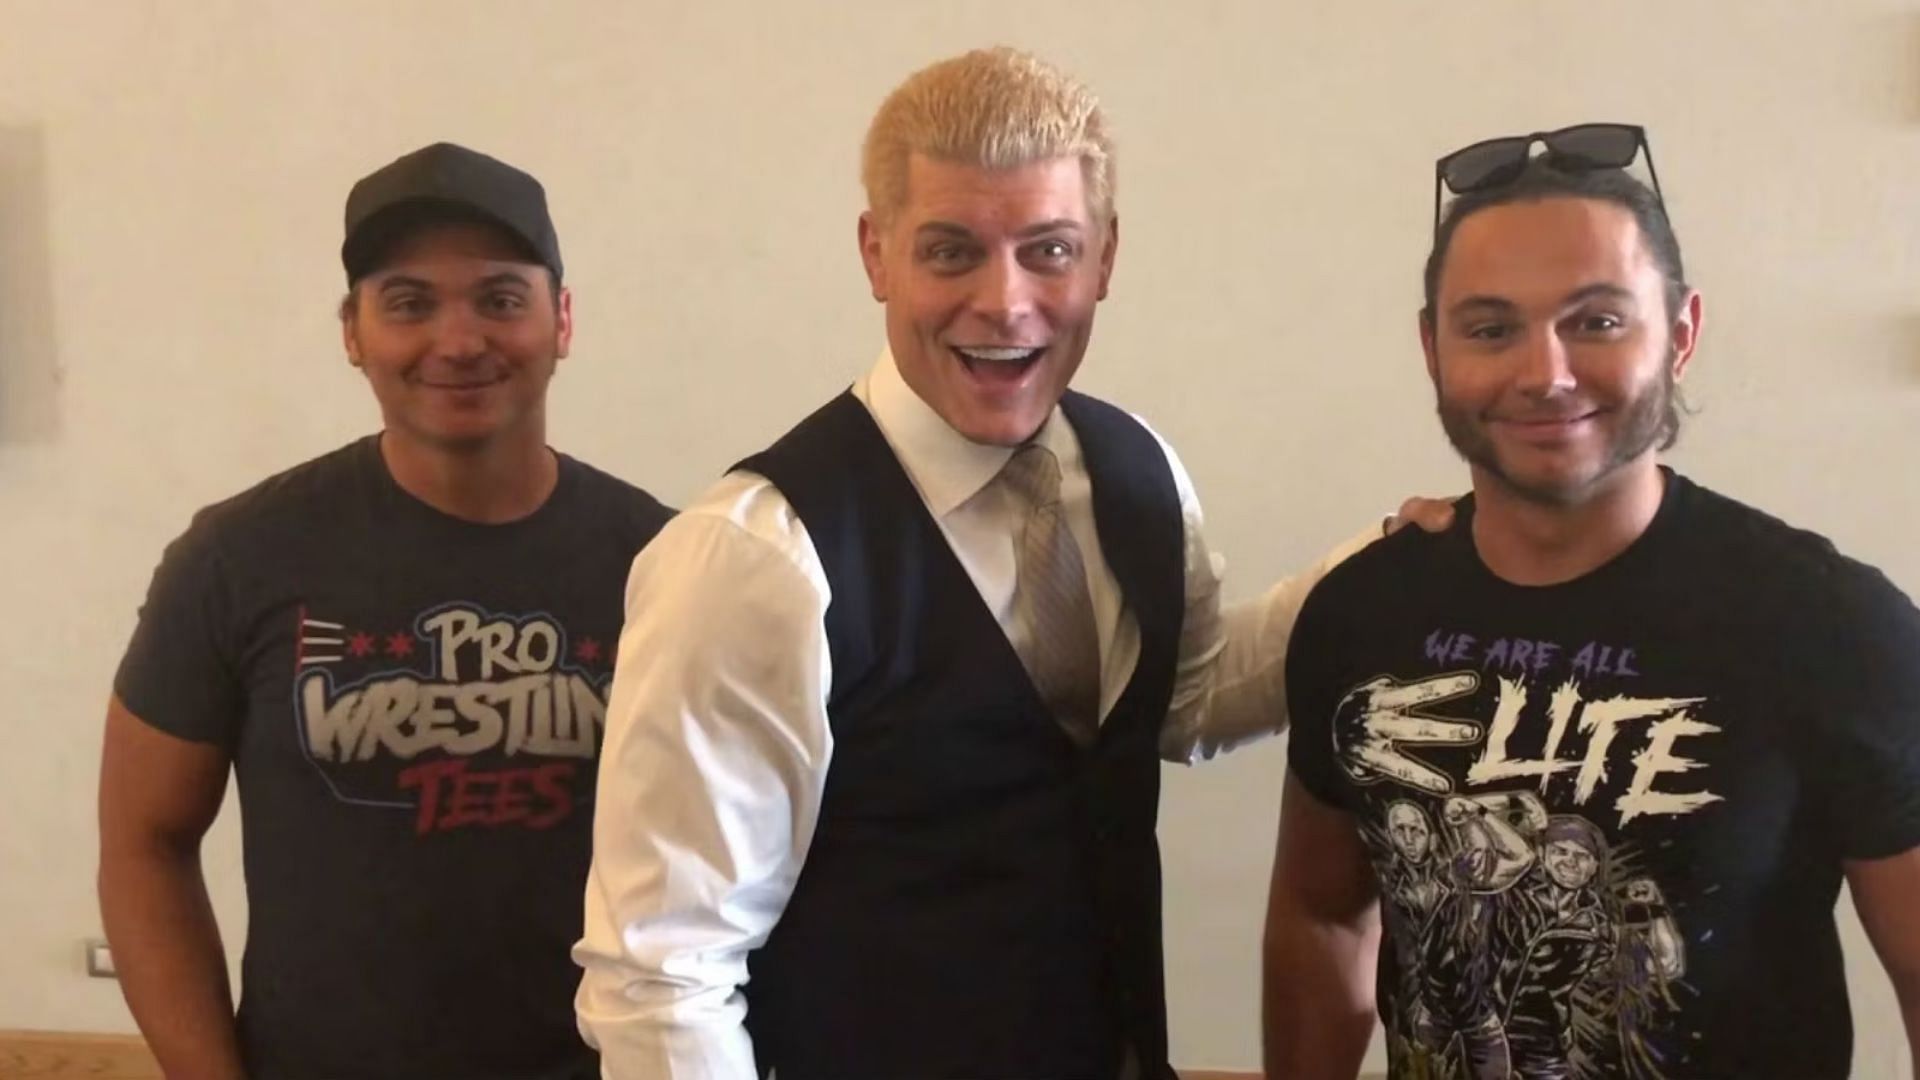 Cody Rhodes and The Young Bucks initially began AEW as the company